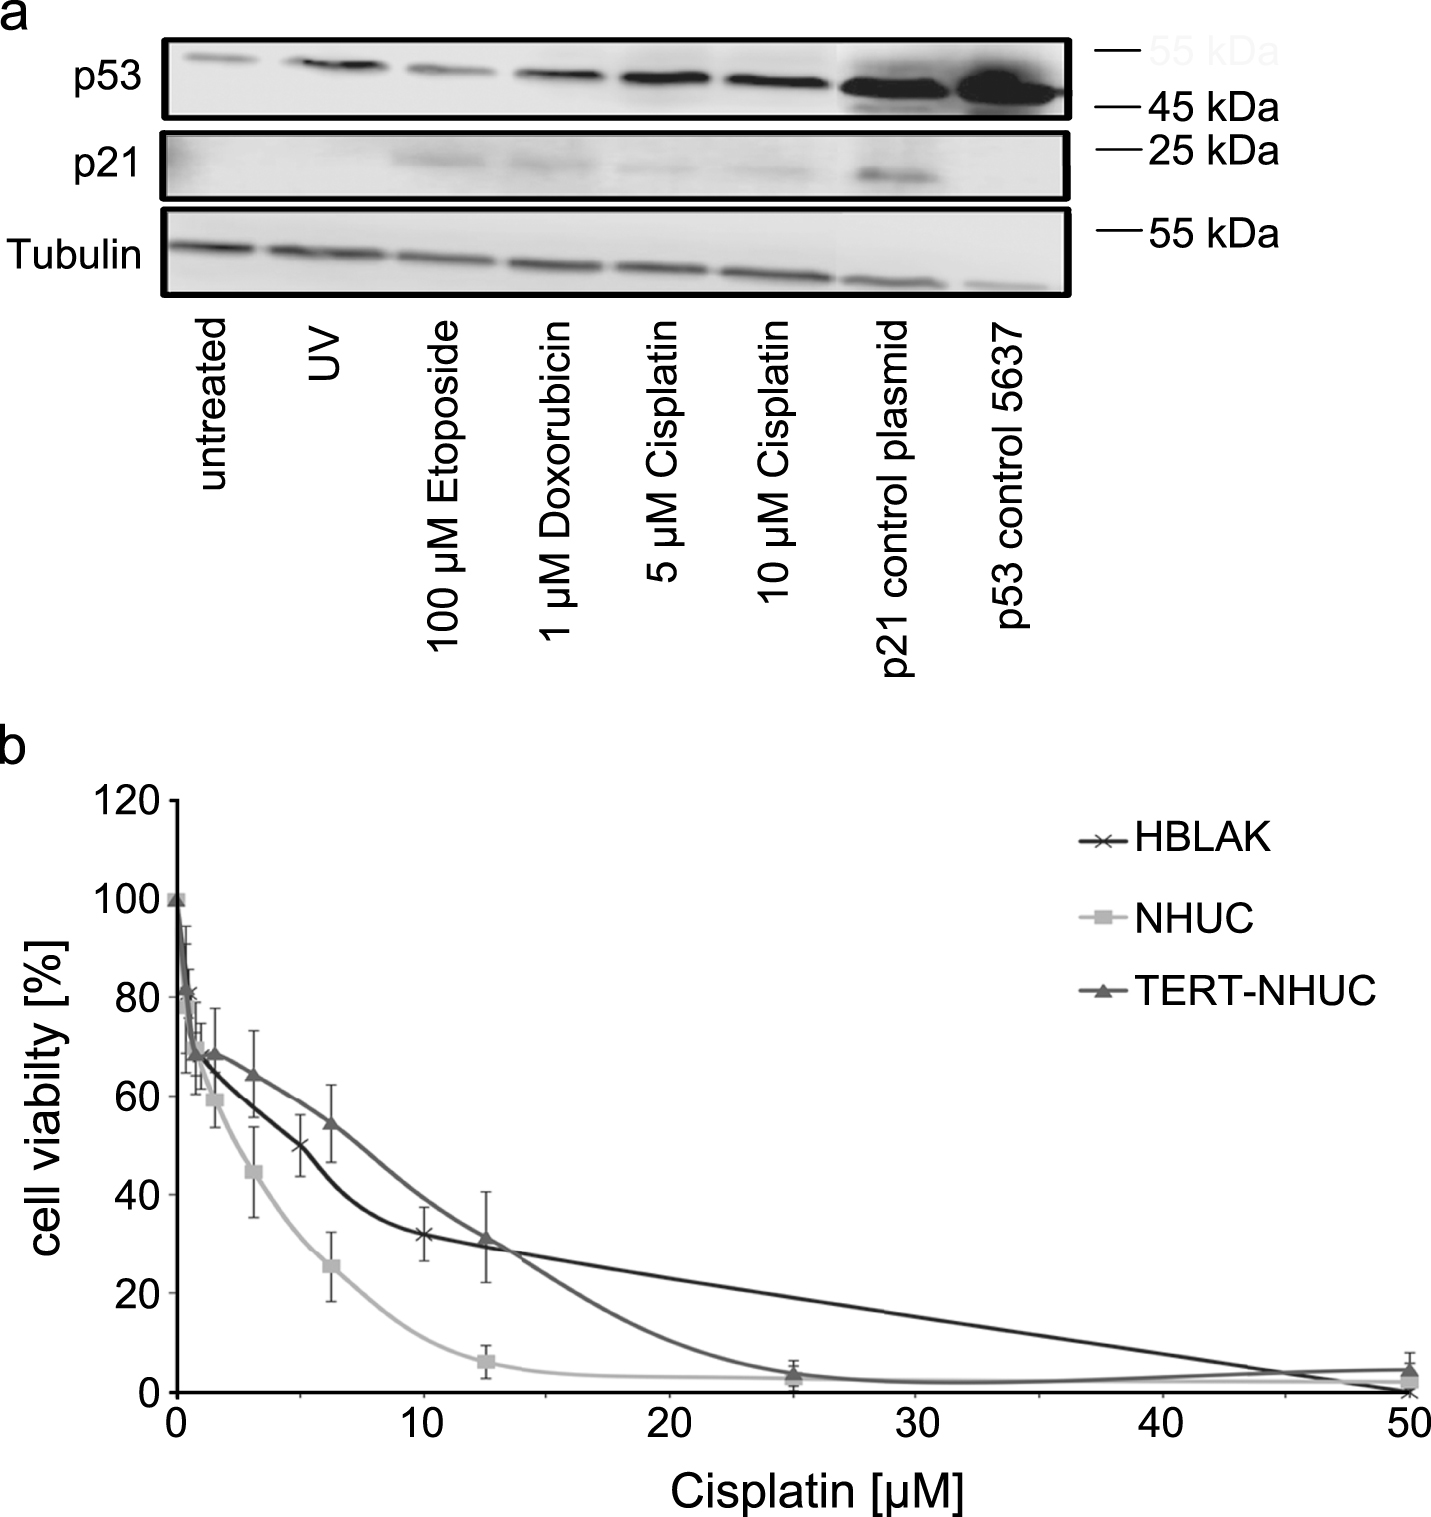 Sensitivity of HBLAK cells towards cytotoxic treatment. (a) Molecular response to cellular stress induced by UV radiation (40 J/m2) or the indicated concentrations of Cisplatin, Etoposide and Doxorubicin (all 24 h) by western blot analysis of p53 and p21. α-Tubulin was detected as a loading control. The UC cell line 5637 and cells transfected with a p21 plasmid served as positive controls for p53 and p21, respectively. (b) Sensitivity of HBLAK towards treatment with Cisplatin for 72 h determined by MTT assay. Mean results from triplicate assays are shown. IC50 concentrations ranged around 5 μM. For comparison TERT-NHUC cells and three different passages of a primary NHUC cultured were treated accordingly.